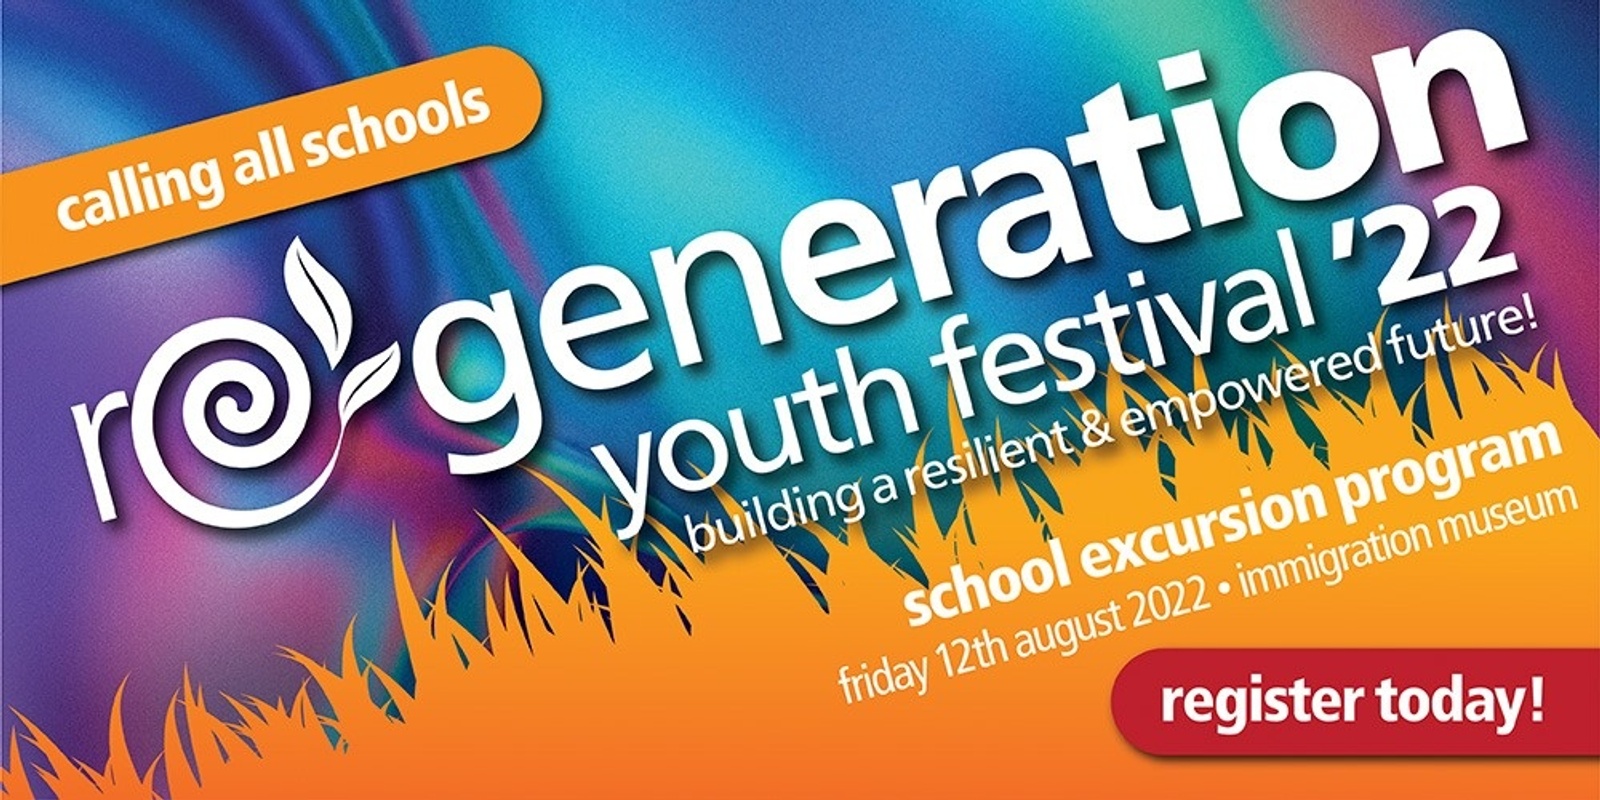 Banner image for re-generation youth festival 2022 - school excursion program